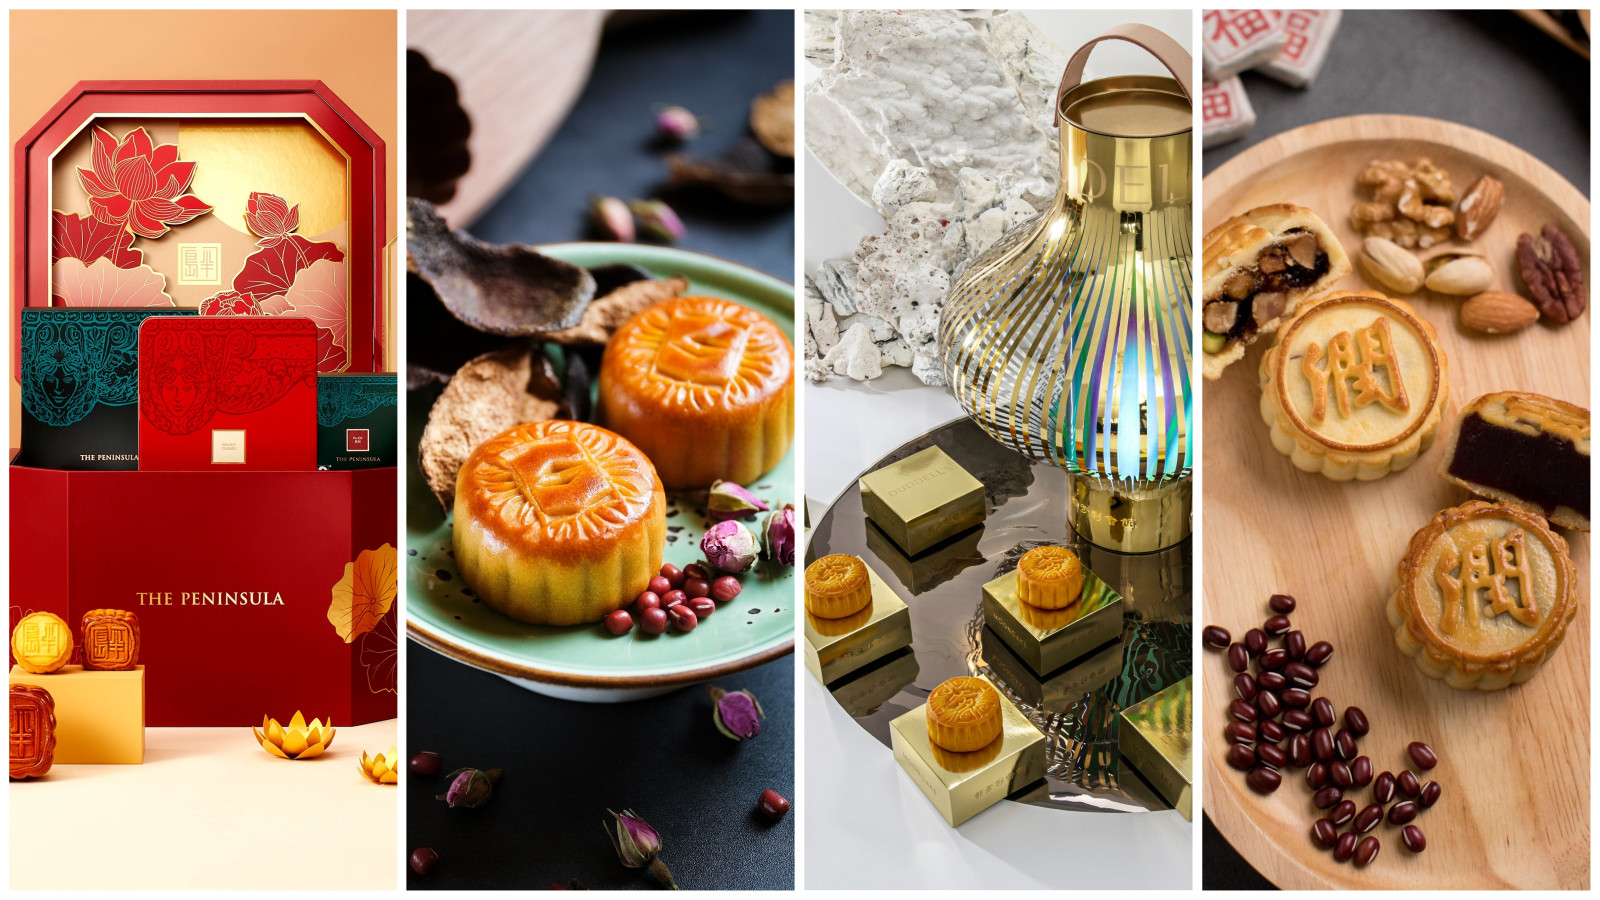 If you’re looking to shell out on mooncakes this Mid-Autumn Festival, then look no further than these luxurious mooncakes.  Photos: The Peninsula, Shangri-La Group, Duddell’s, St. Regis.